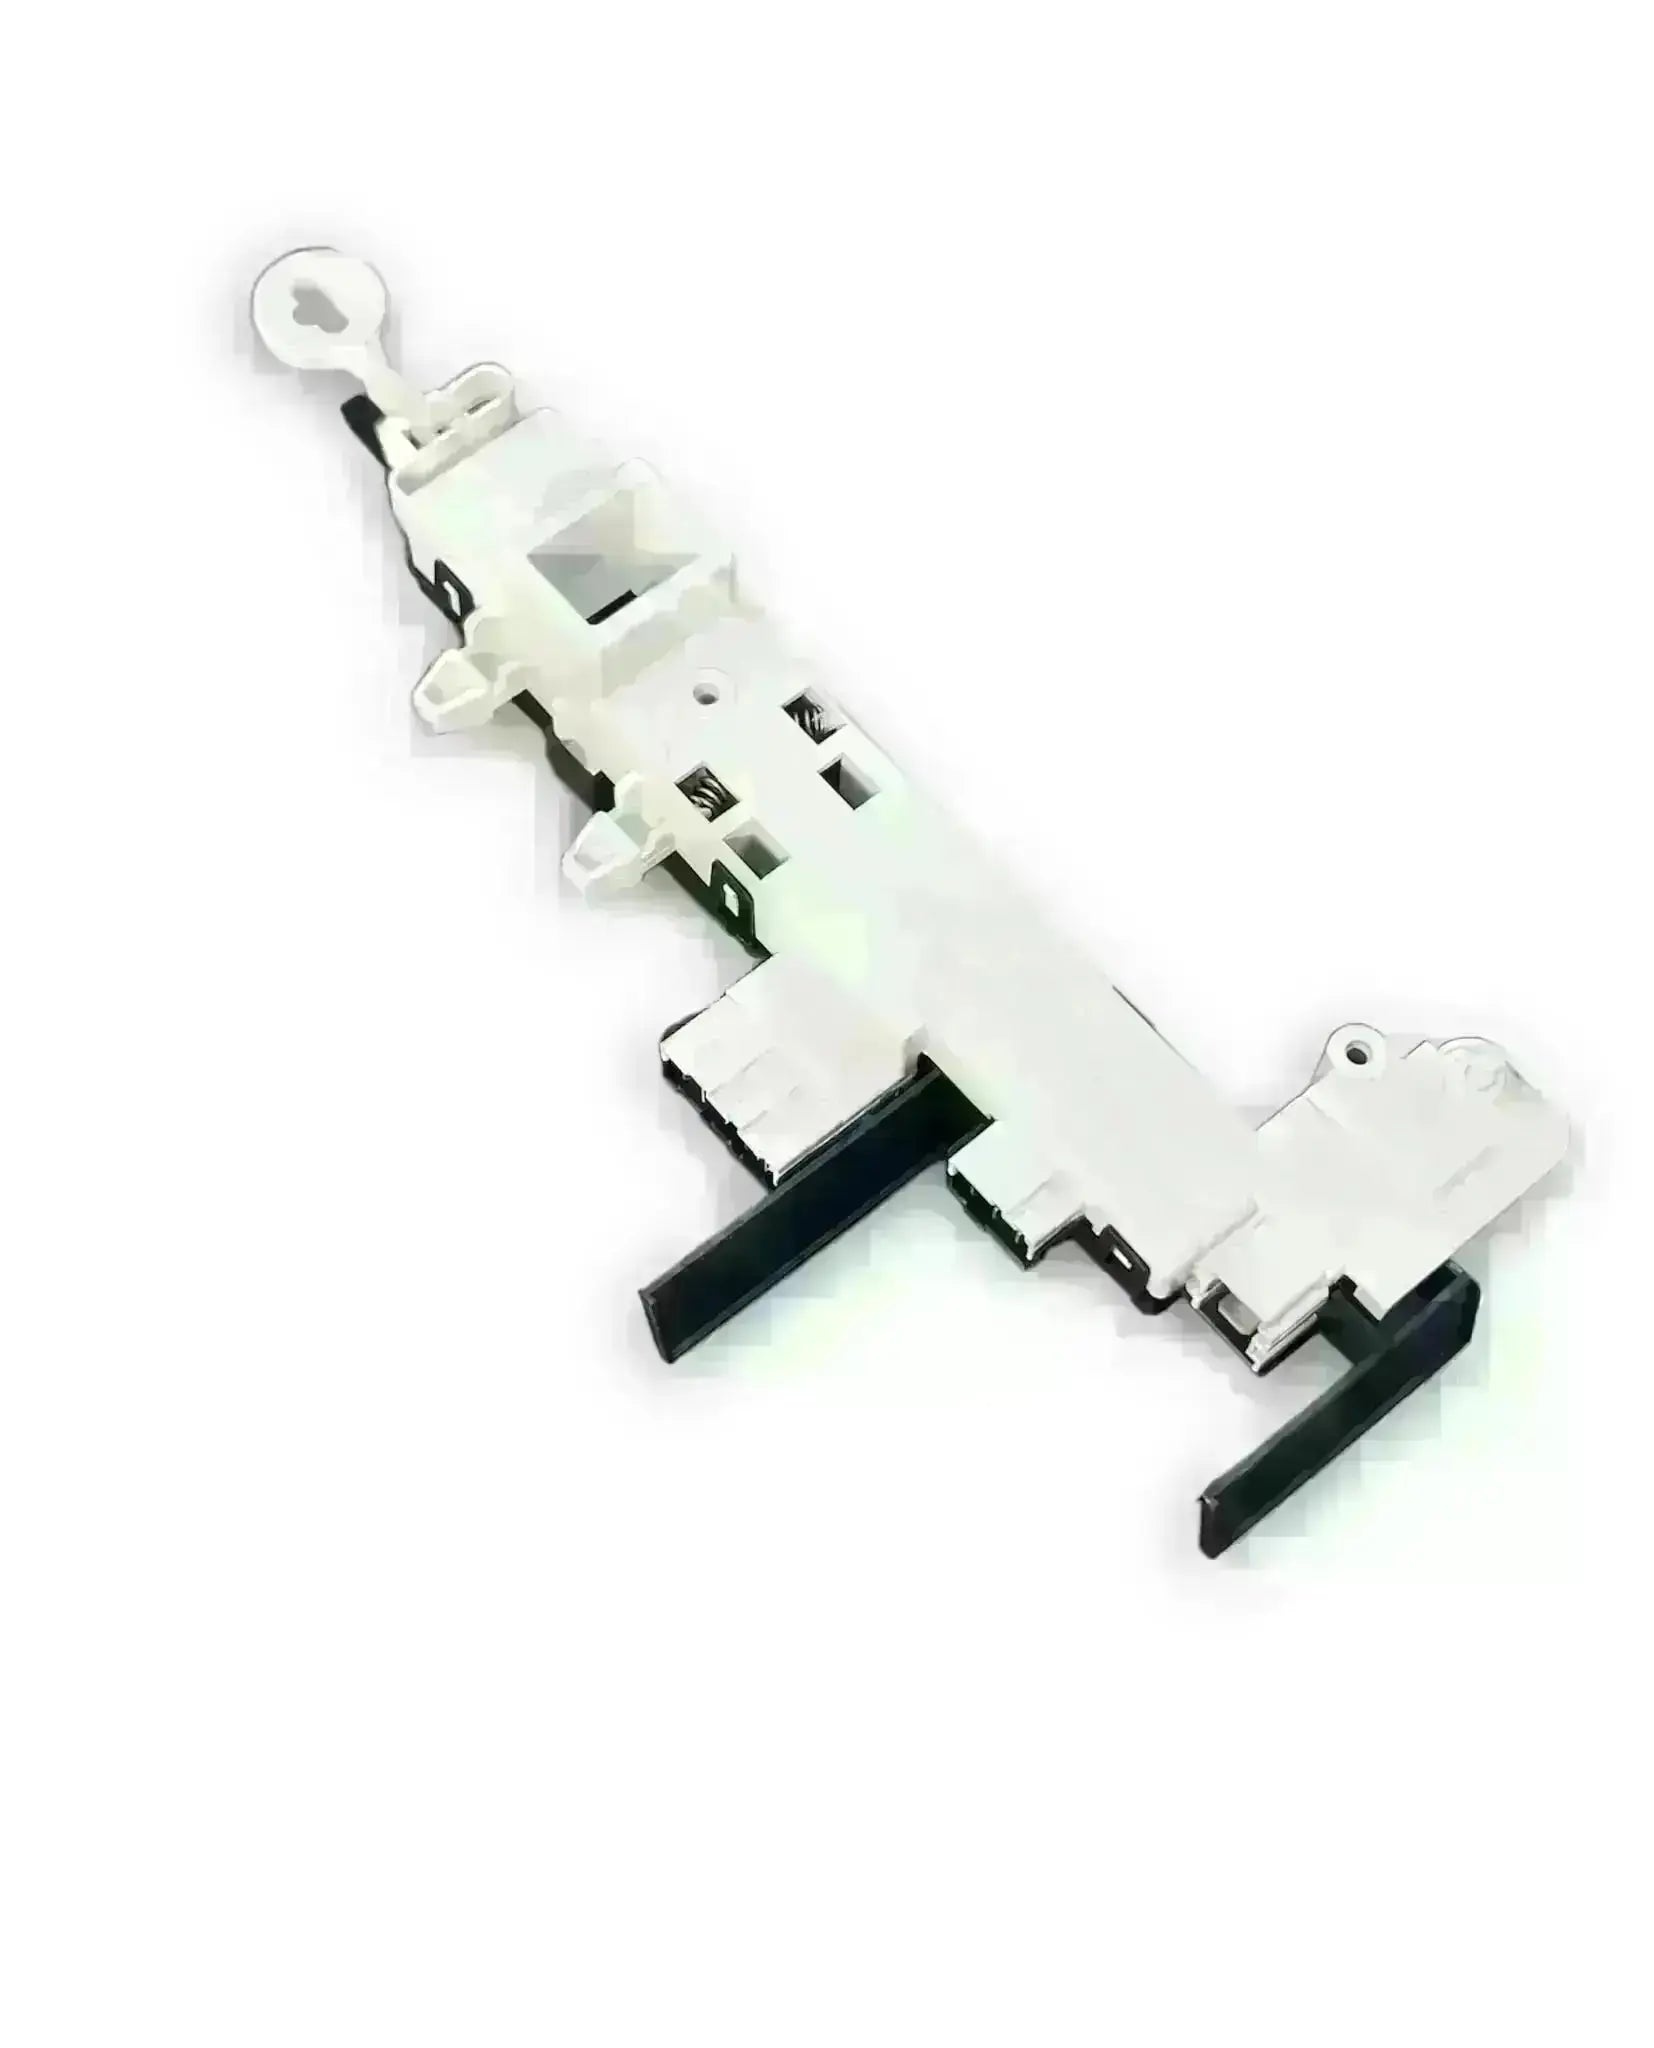 Samsung Washer Door Lock /Switch OEM - DC64-00519D, REPLACES: DC64-00519B DC97-16899A 4545806 AP6027082 PS11762120 EAP11762120 INVERTEC